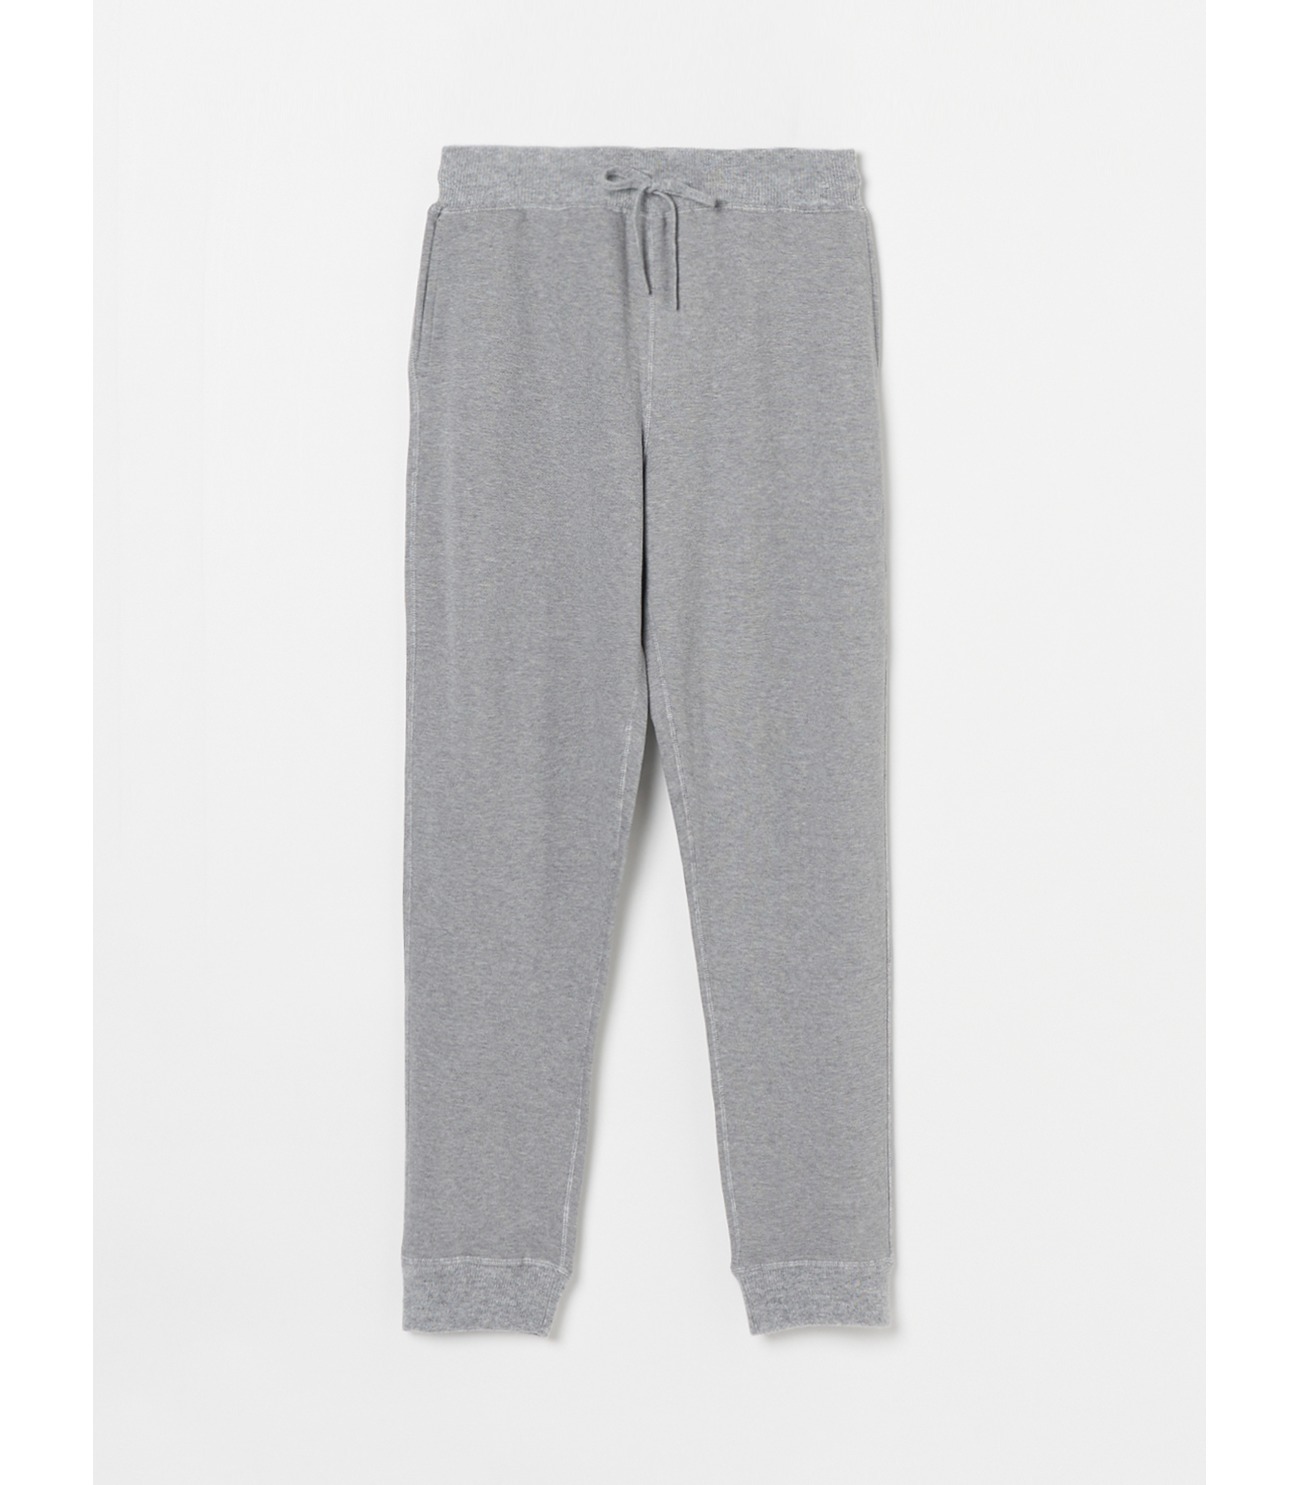 Cashmere×new soft terry pants 詳細画像 grey 1